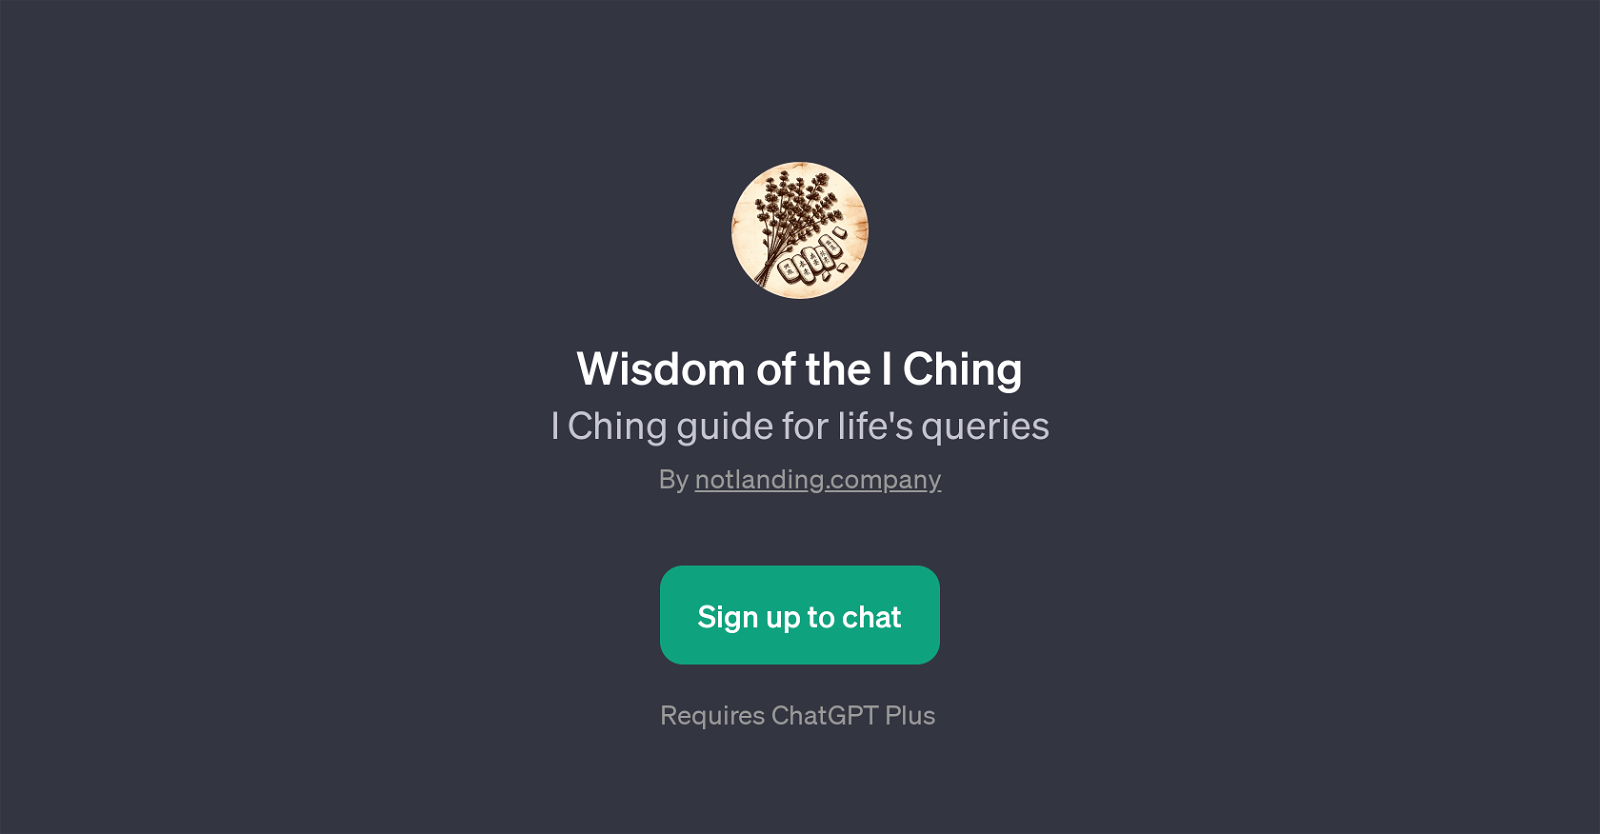 Wisdom of the I Ching website